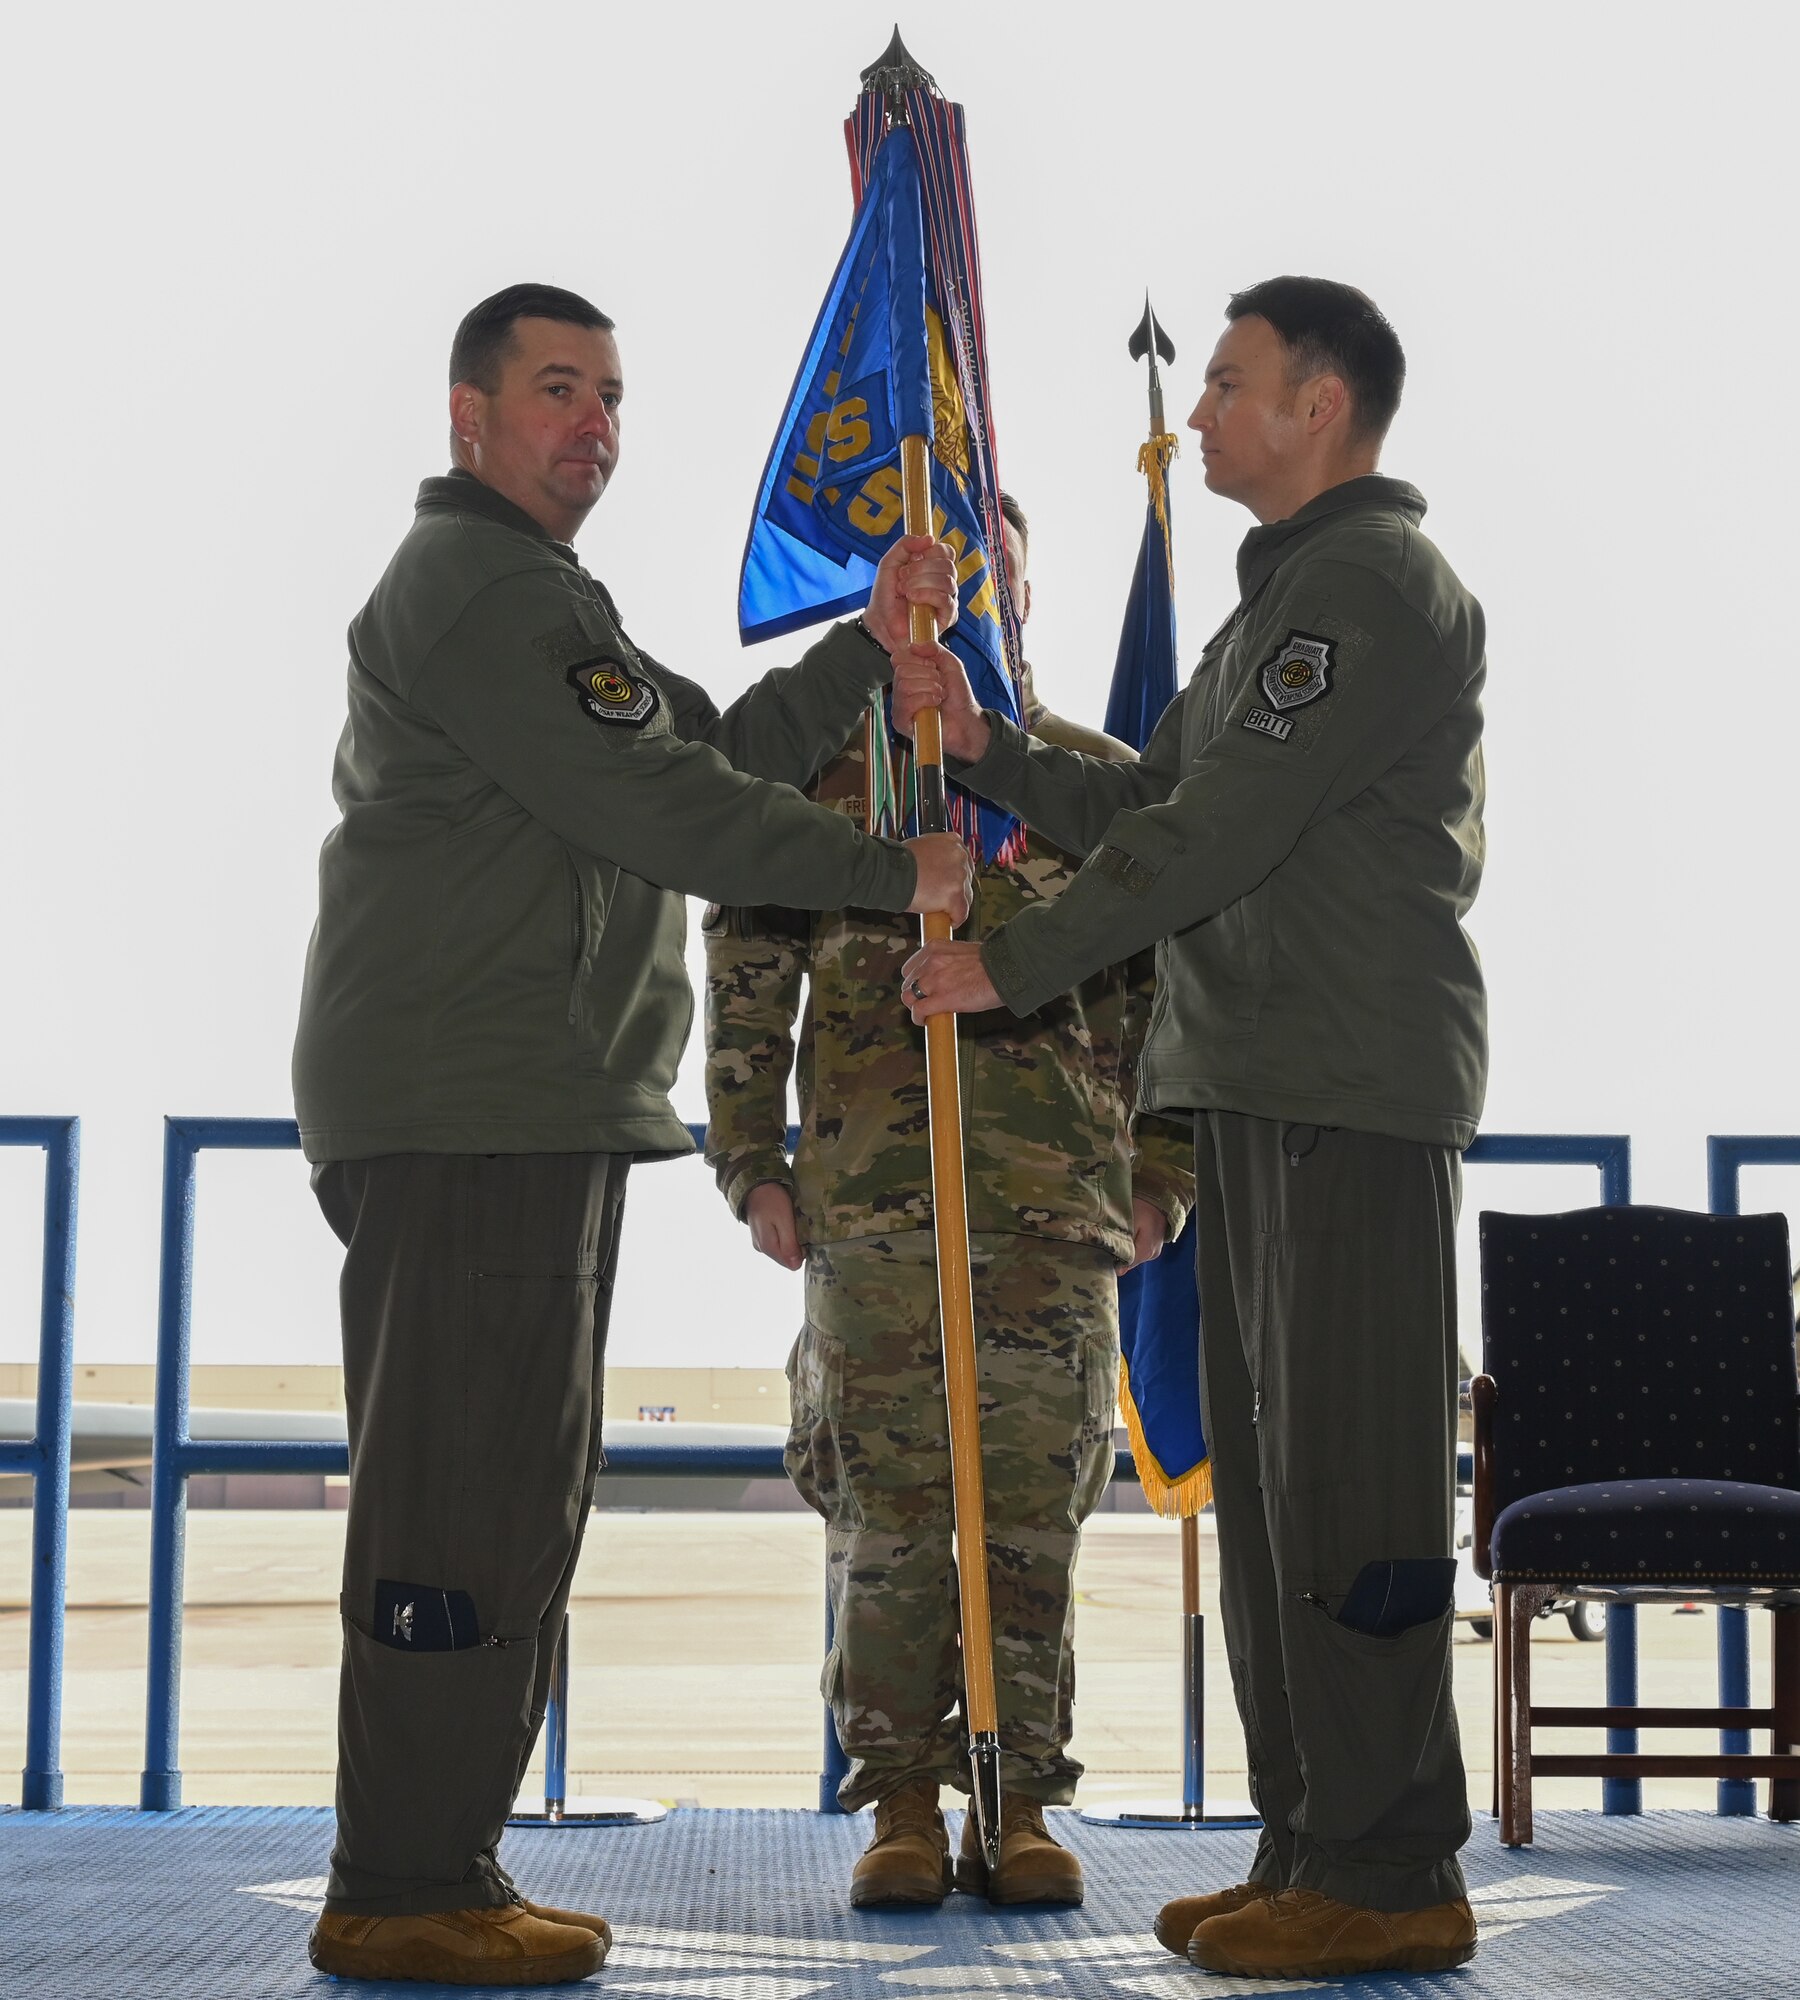 Col. Daniel Lehoski, United States Air Force Weapons School Commandant (left), passes the guidon to Lt. Col. Alexander Reich, 325th Weapons Squadron, 57th Wing (right), at Whiteman Air Force Base, Missouri, December 14, 2022. Change of commands are a military tradition of passing command from one commanding officer to another. (U.S. Air Force photo by Airman 1st Class Joseph Garcia)